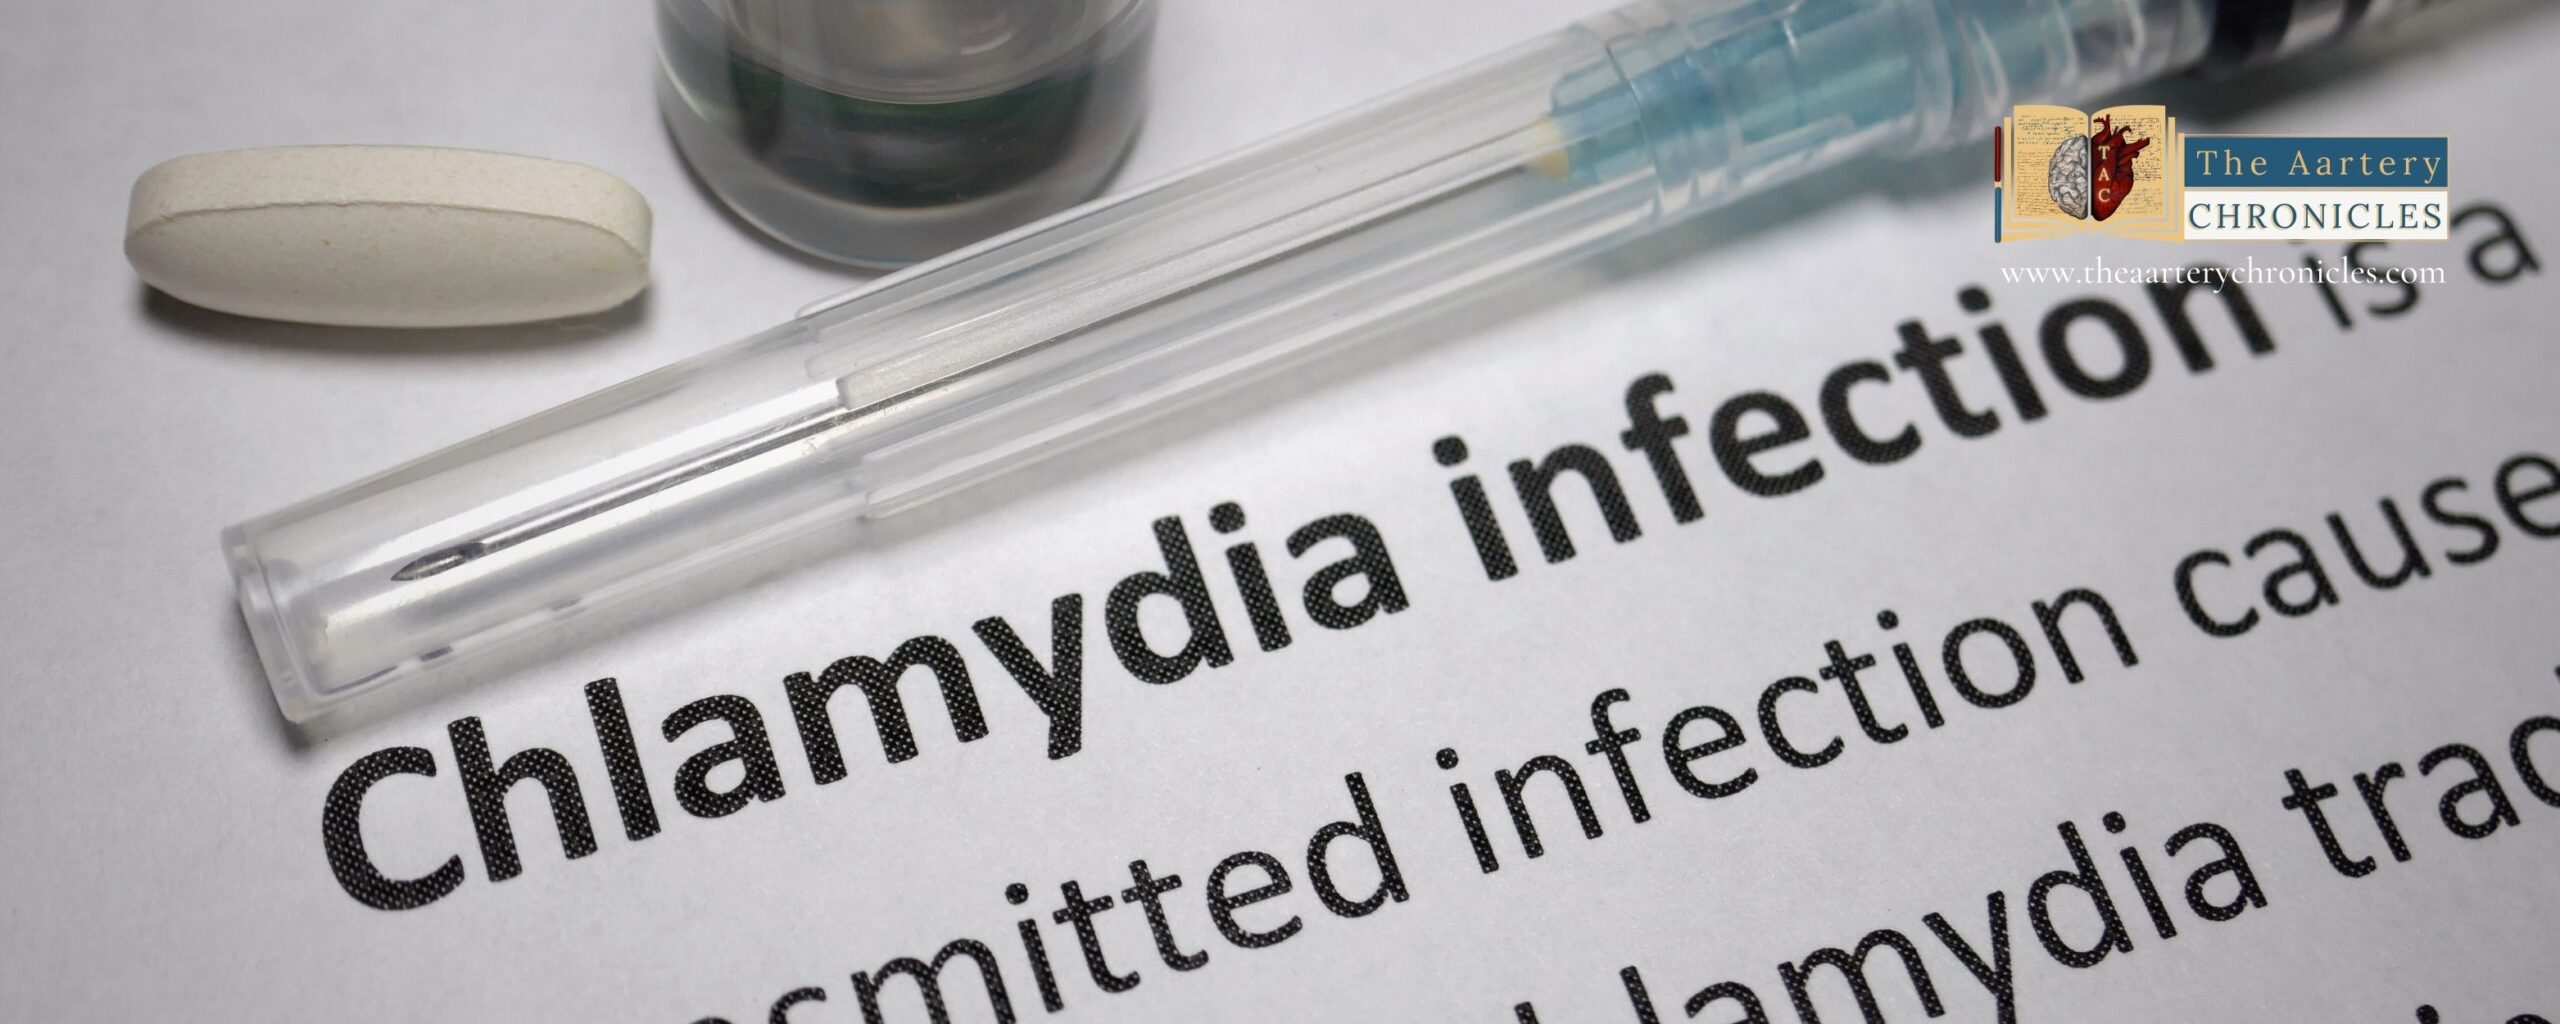 chlamydia infection-The-Aartery-chronicles-TAC